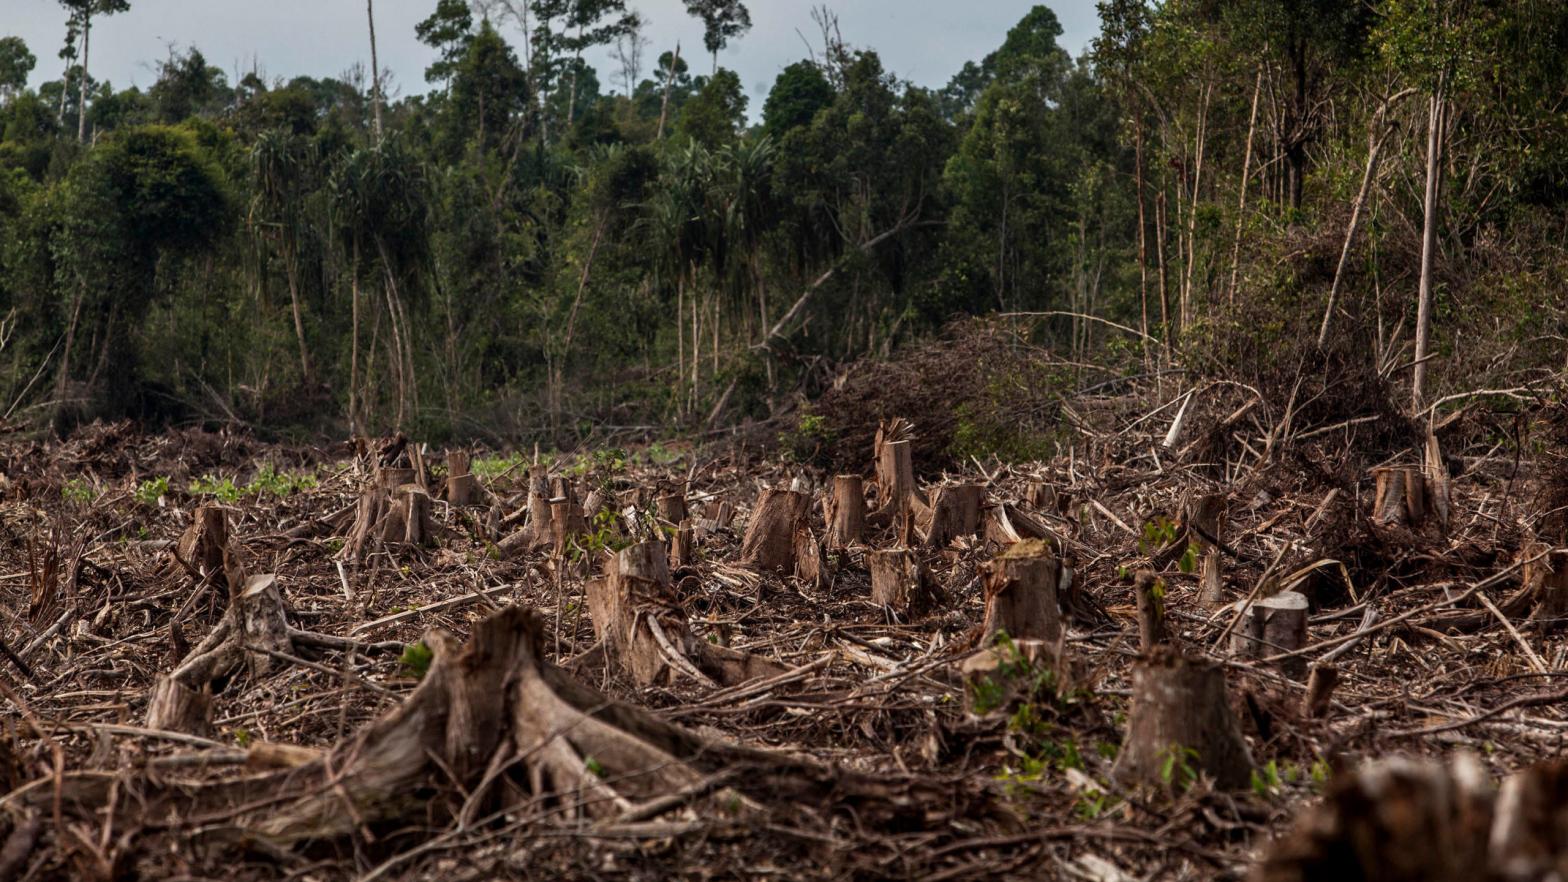 A 2004 photo of recently deforested land in Riau province, Sumatra, Indonesia.  (Photo: Ulet Ifansasti, Getty Images)